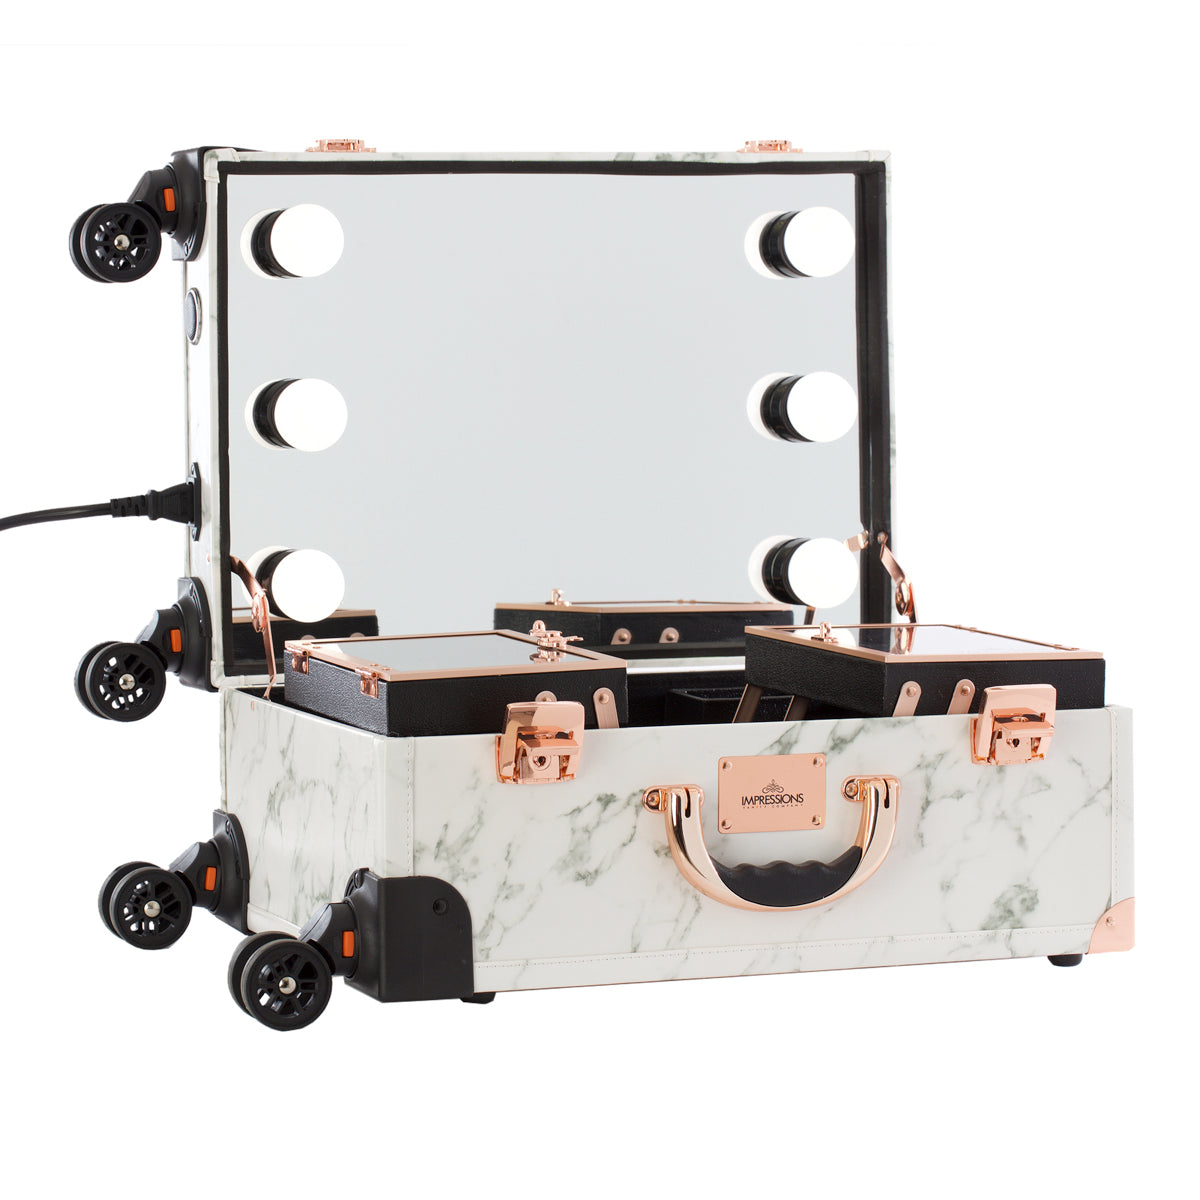 If you can't go anywhere without your skin care and makeup, this vanity case  needs to be your new travel buddy